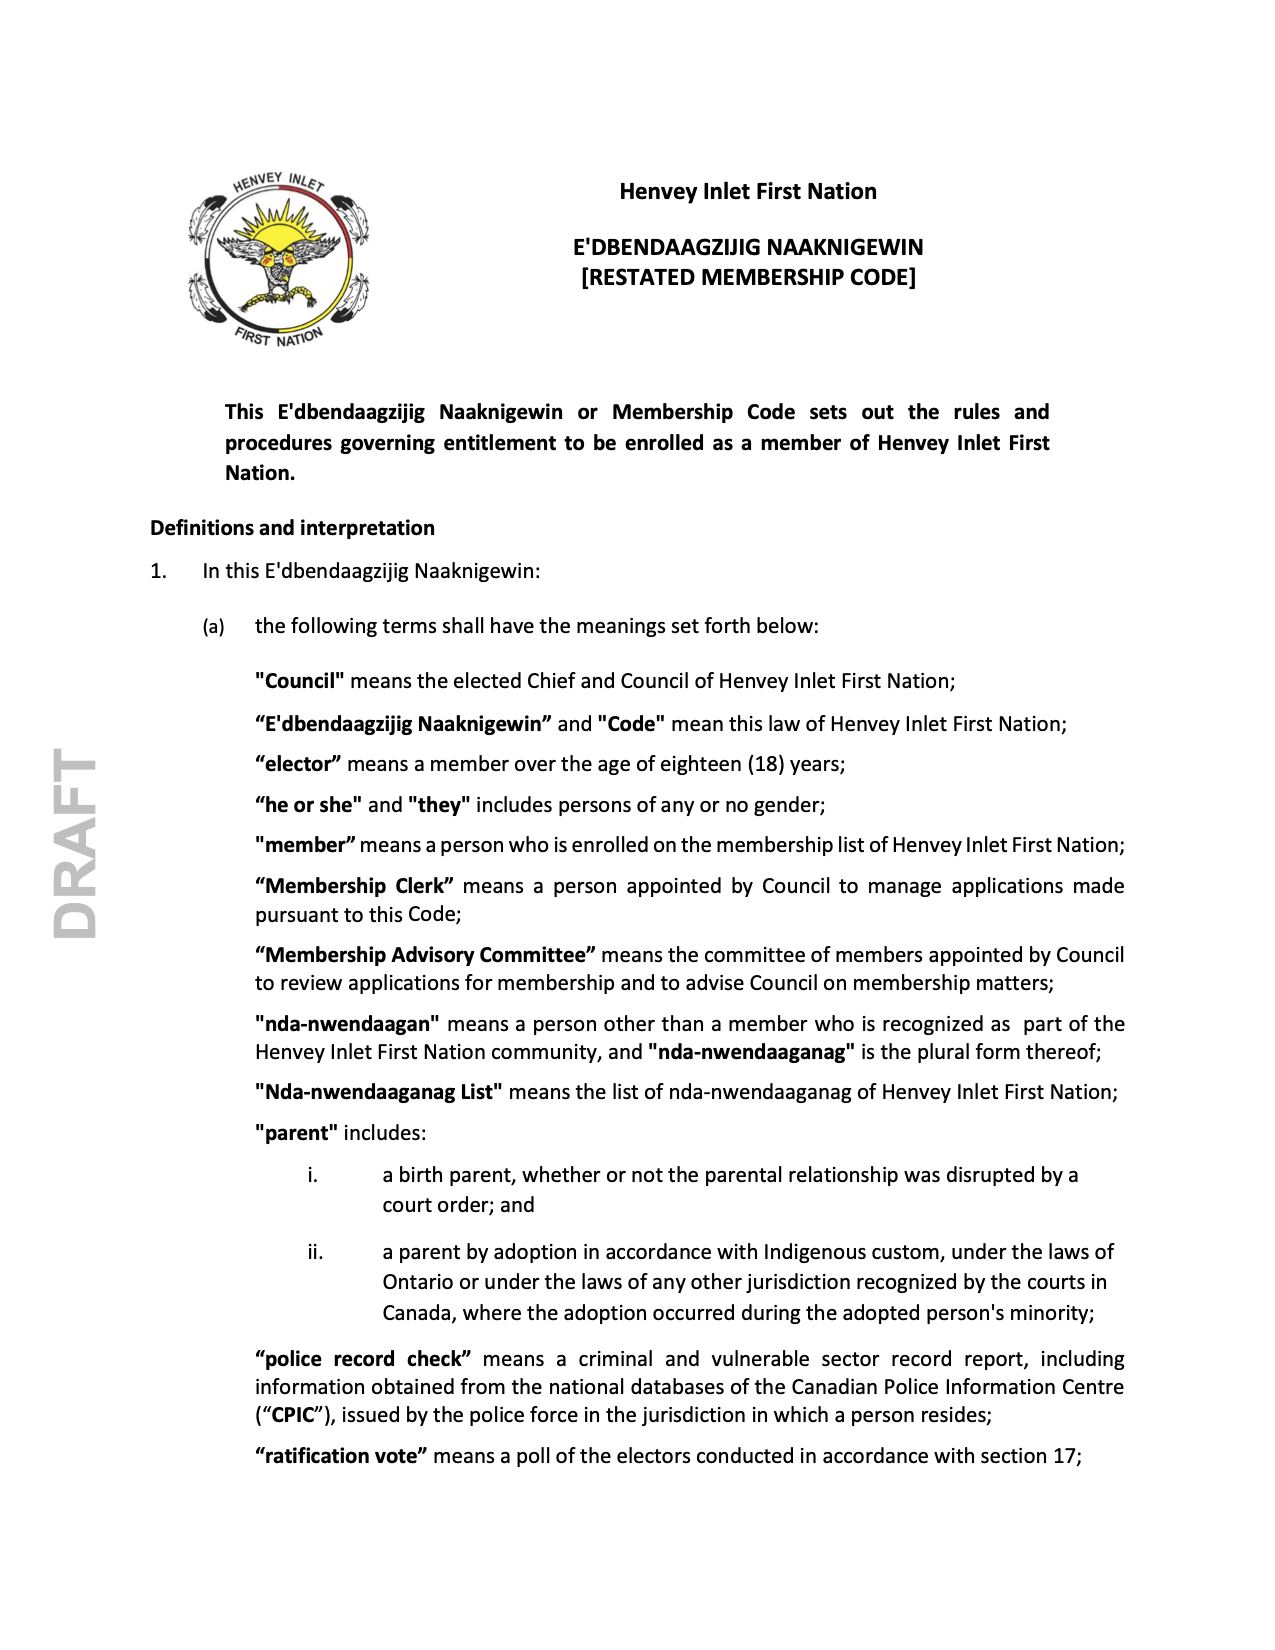 Henvey Inlet First Nation E'DBENDAAGZIJIG NAAKNIGEWIN [RESTATED MEMBERSHIP CODE] This E'dbendaagzijig Naaknigewin or Membership Code sets out the rules and procedures governing entitlement to be enrolled as a member of Henvey Inlet First Nation. Document Image